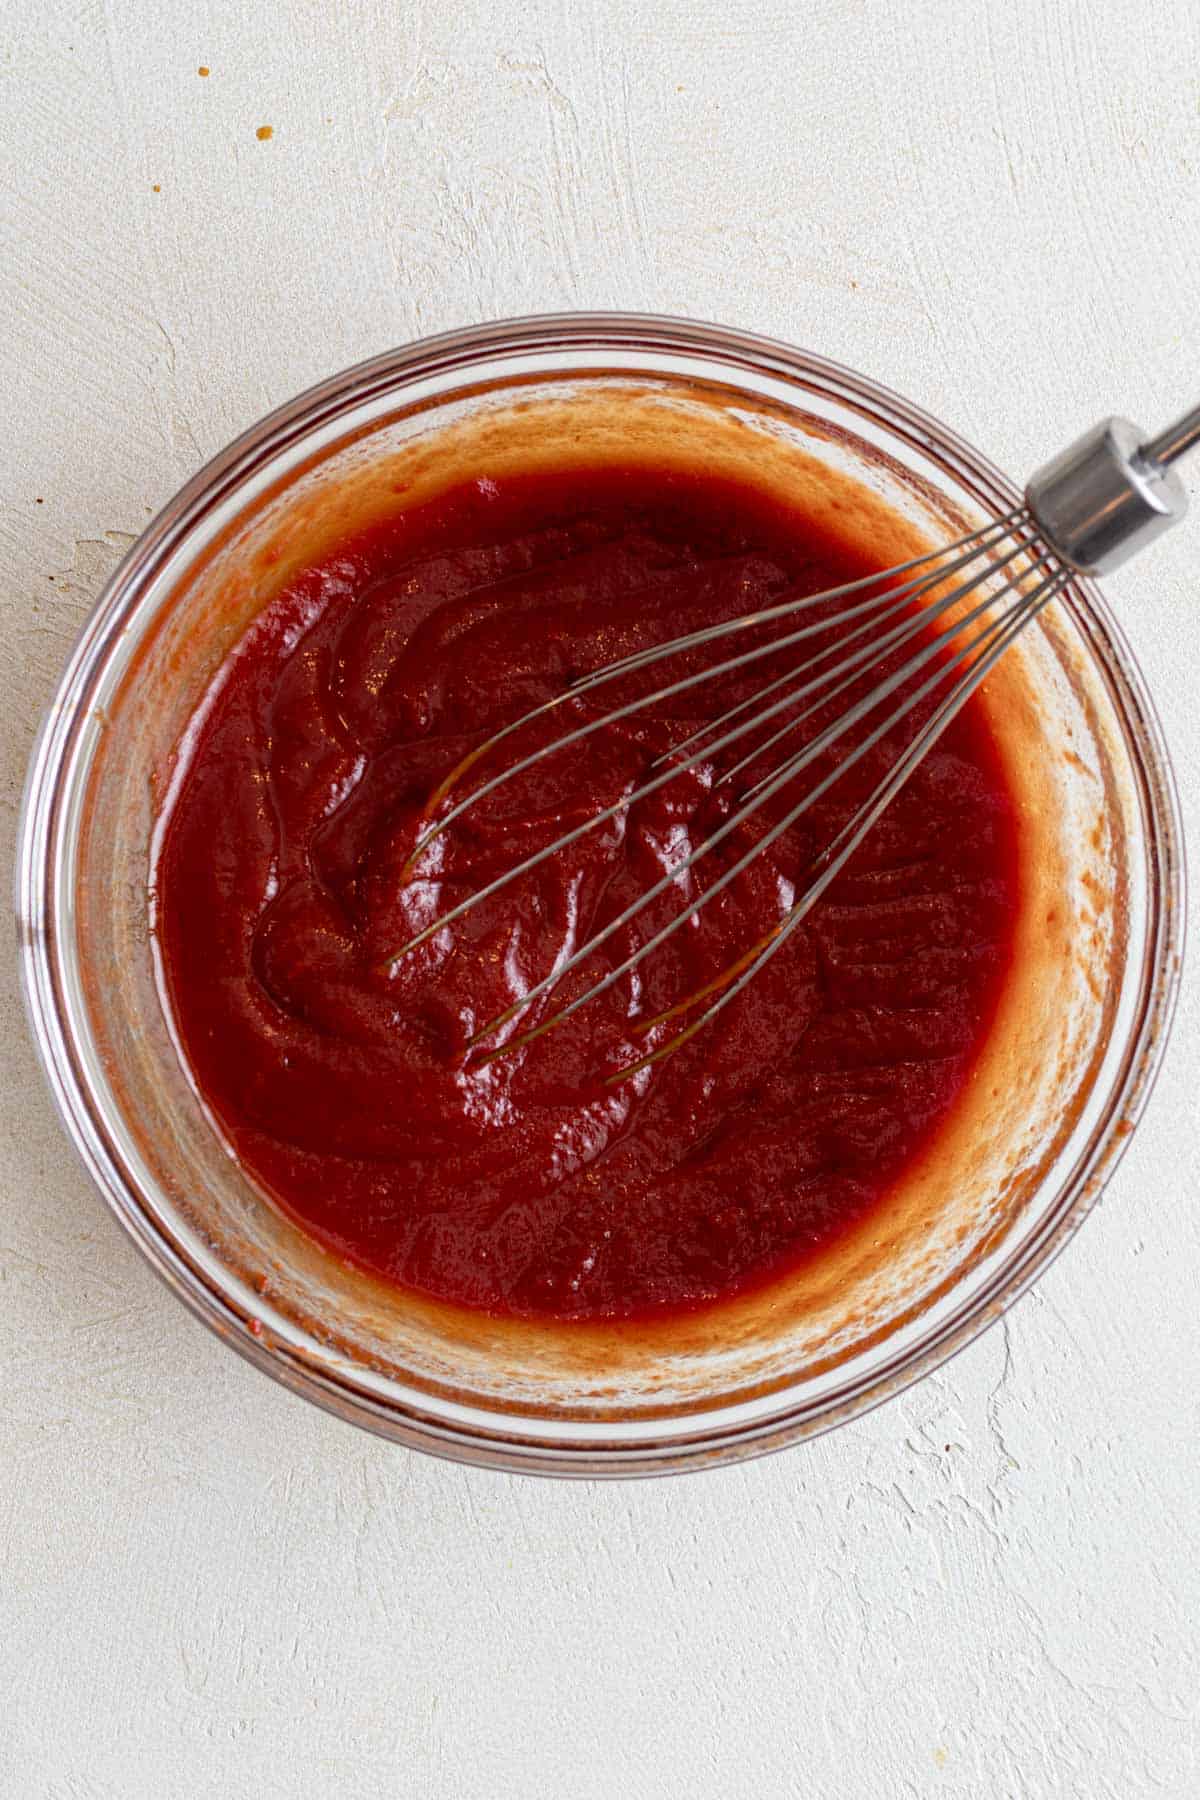 Tomato paste, maple syrup, apple cider vinegar, and tamari whisked together into ketchup in a glass mixing bowl.